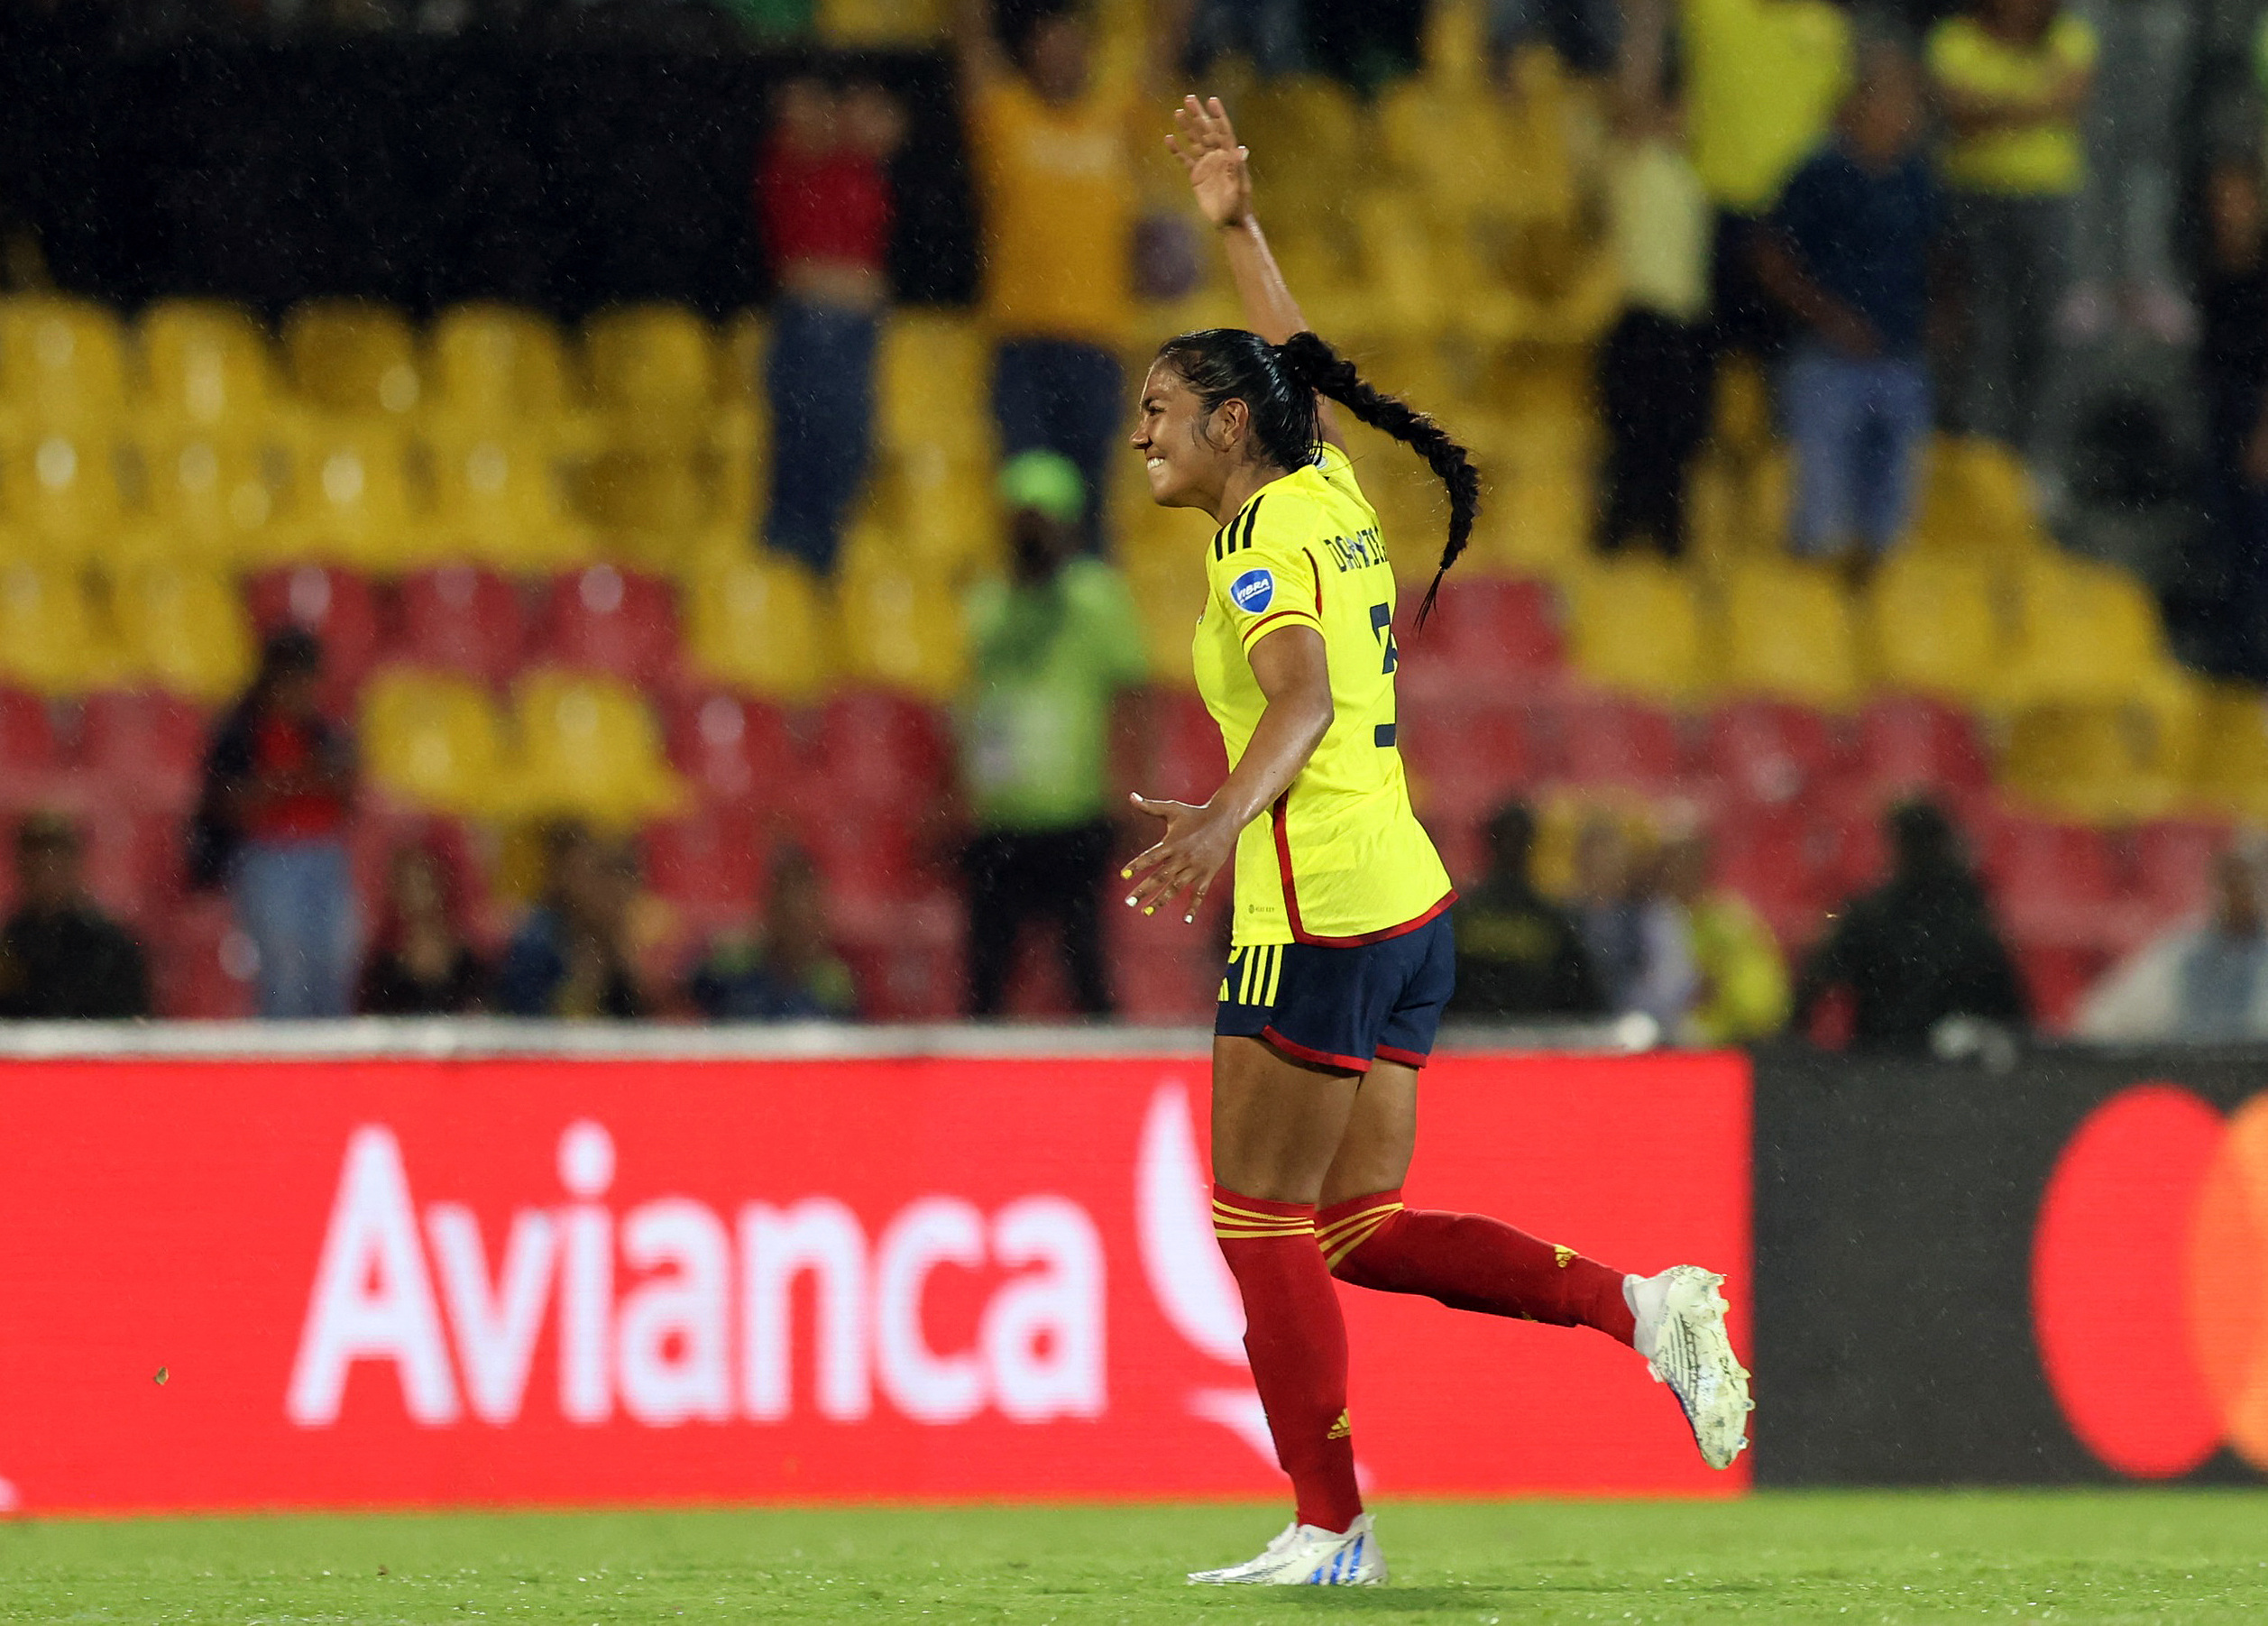 Soccer Football - Women's Copa America - Semi Final - Colombia v Argentina - Estadio Alfonso Lopez, Bucaramanga, Colombia - July 25, 2022 Colombia's Daniela Arias celebrates after the match REUTERS/Luisa Gonzalez